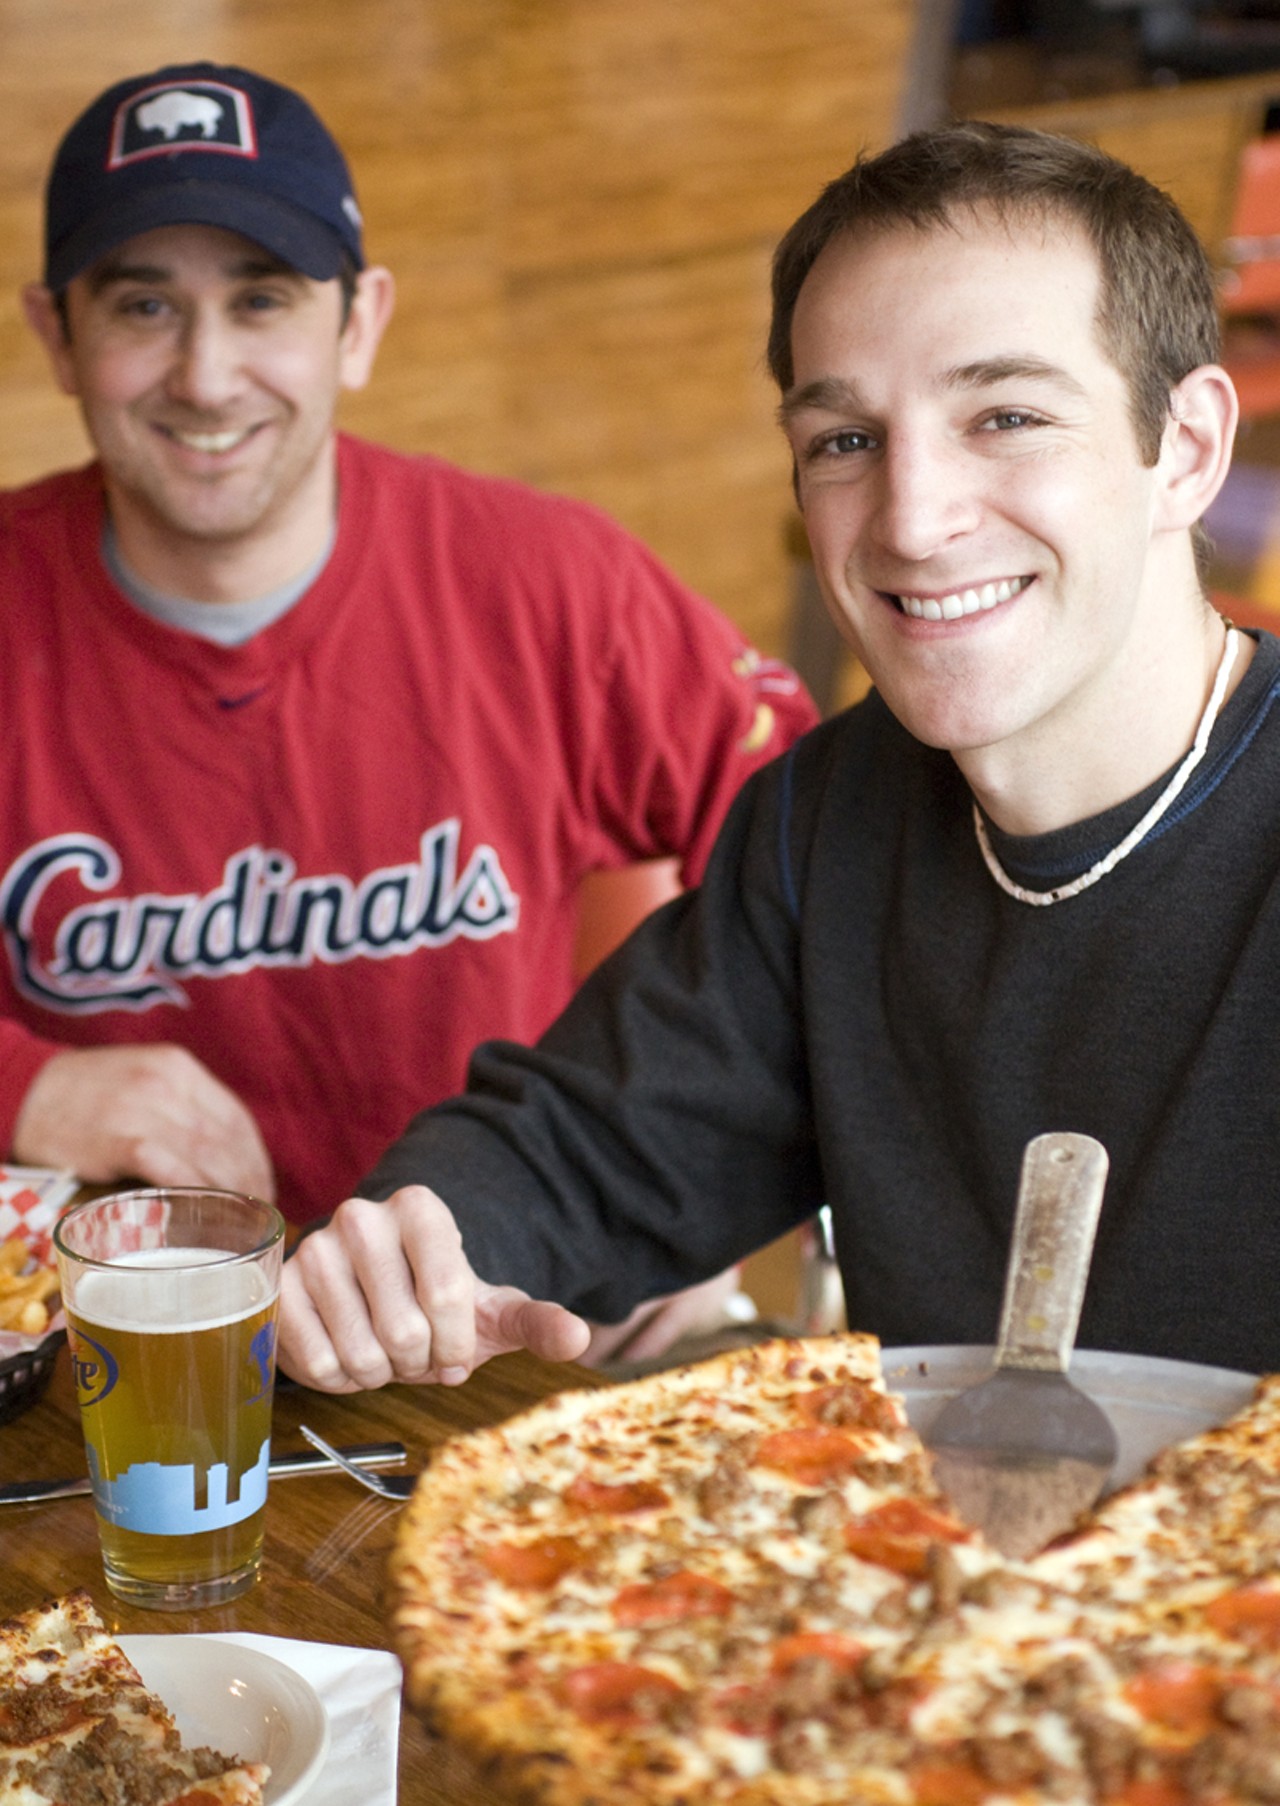 Owners Bill Cipriani (left), a Pittsburgh native and Adrian Glass (right), who grew up in Belleville, met while working at a restaurant in the resort town of Breckenridge, Colorado. One day Adrian gave Bill a call, and said "'I&rsquo;ve got this idea for a Fantasy Sports themed Restaurant and bar,' and three years later, the Post was born," Cipriani recalls.